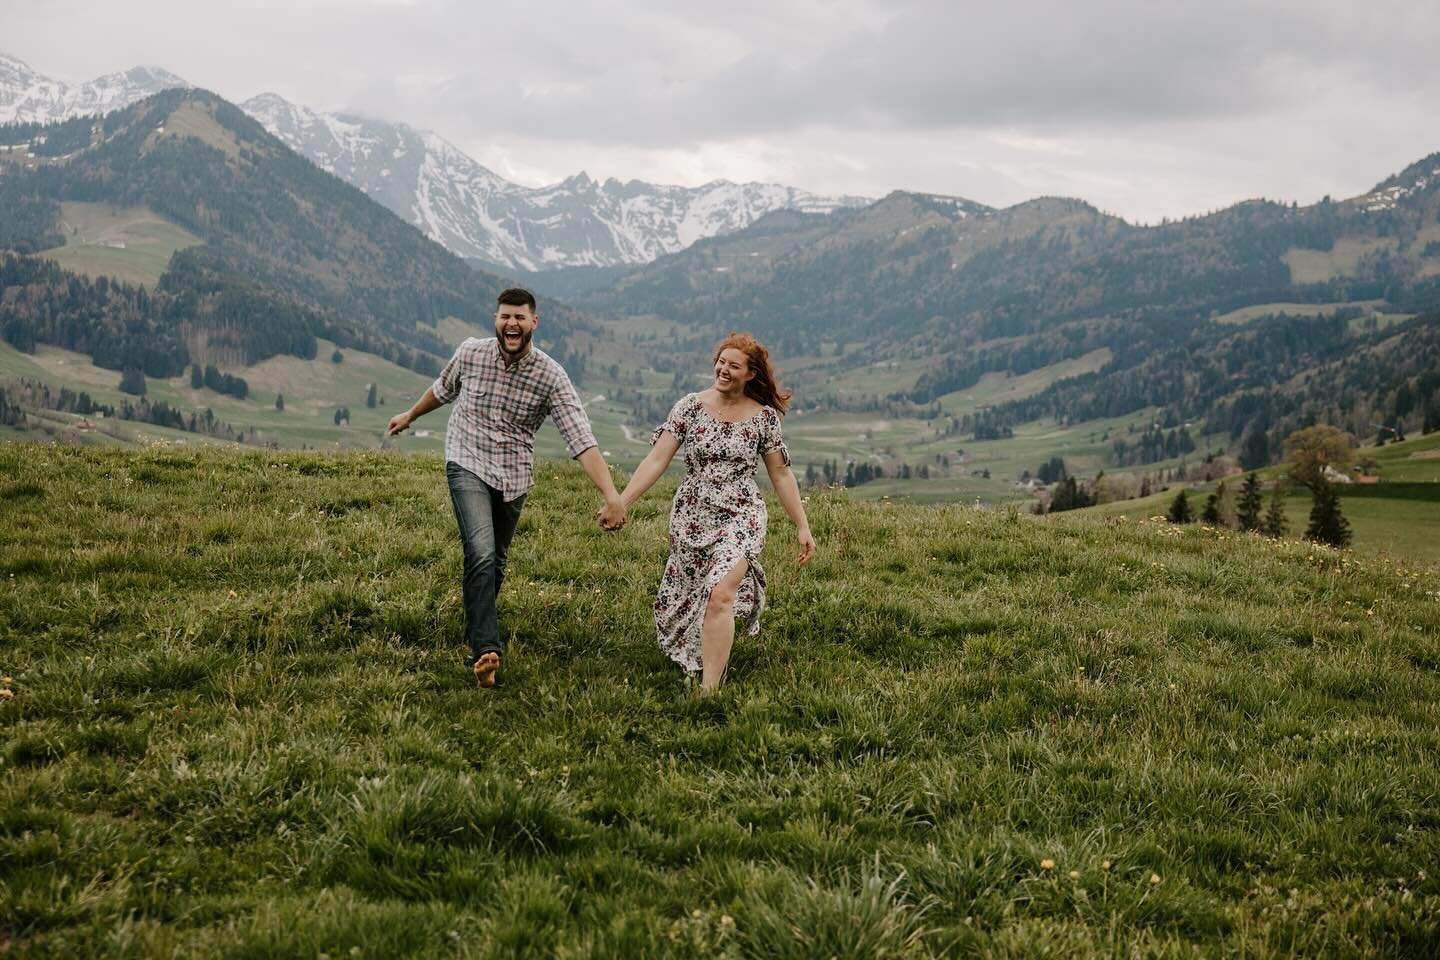 On this day a couple years ago, @o.shepy and @der_german_shepherd got engaged on a little hill in a goat pasture in Switzerland. Somehow we pulled off an international surprise even with my big mouth that can&rsquo;t keep a secret or lie convincingly